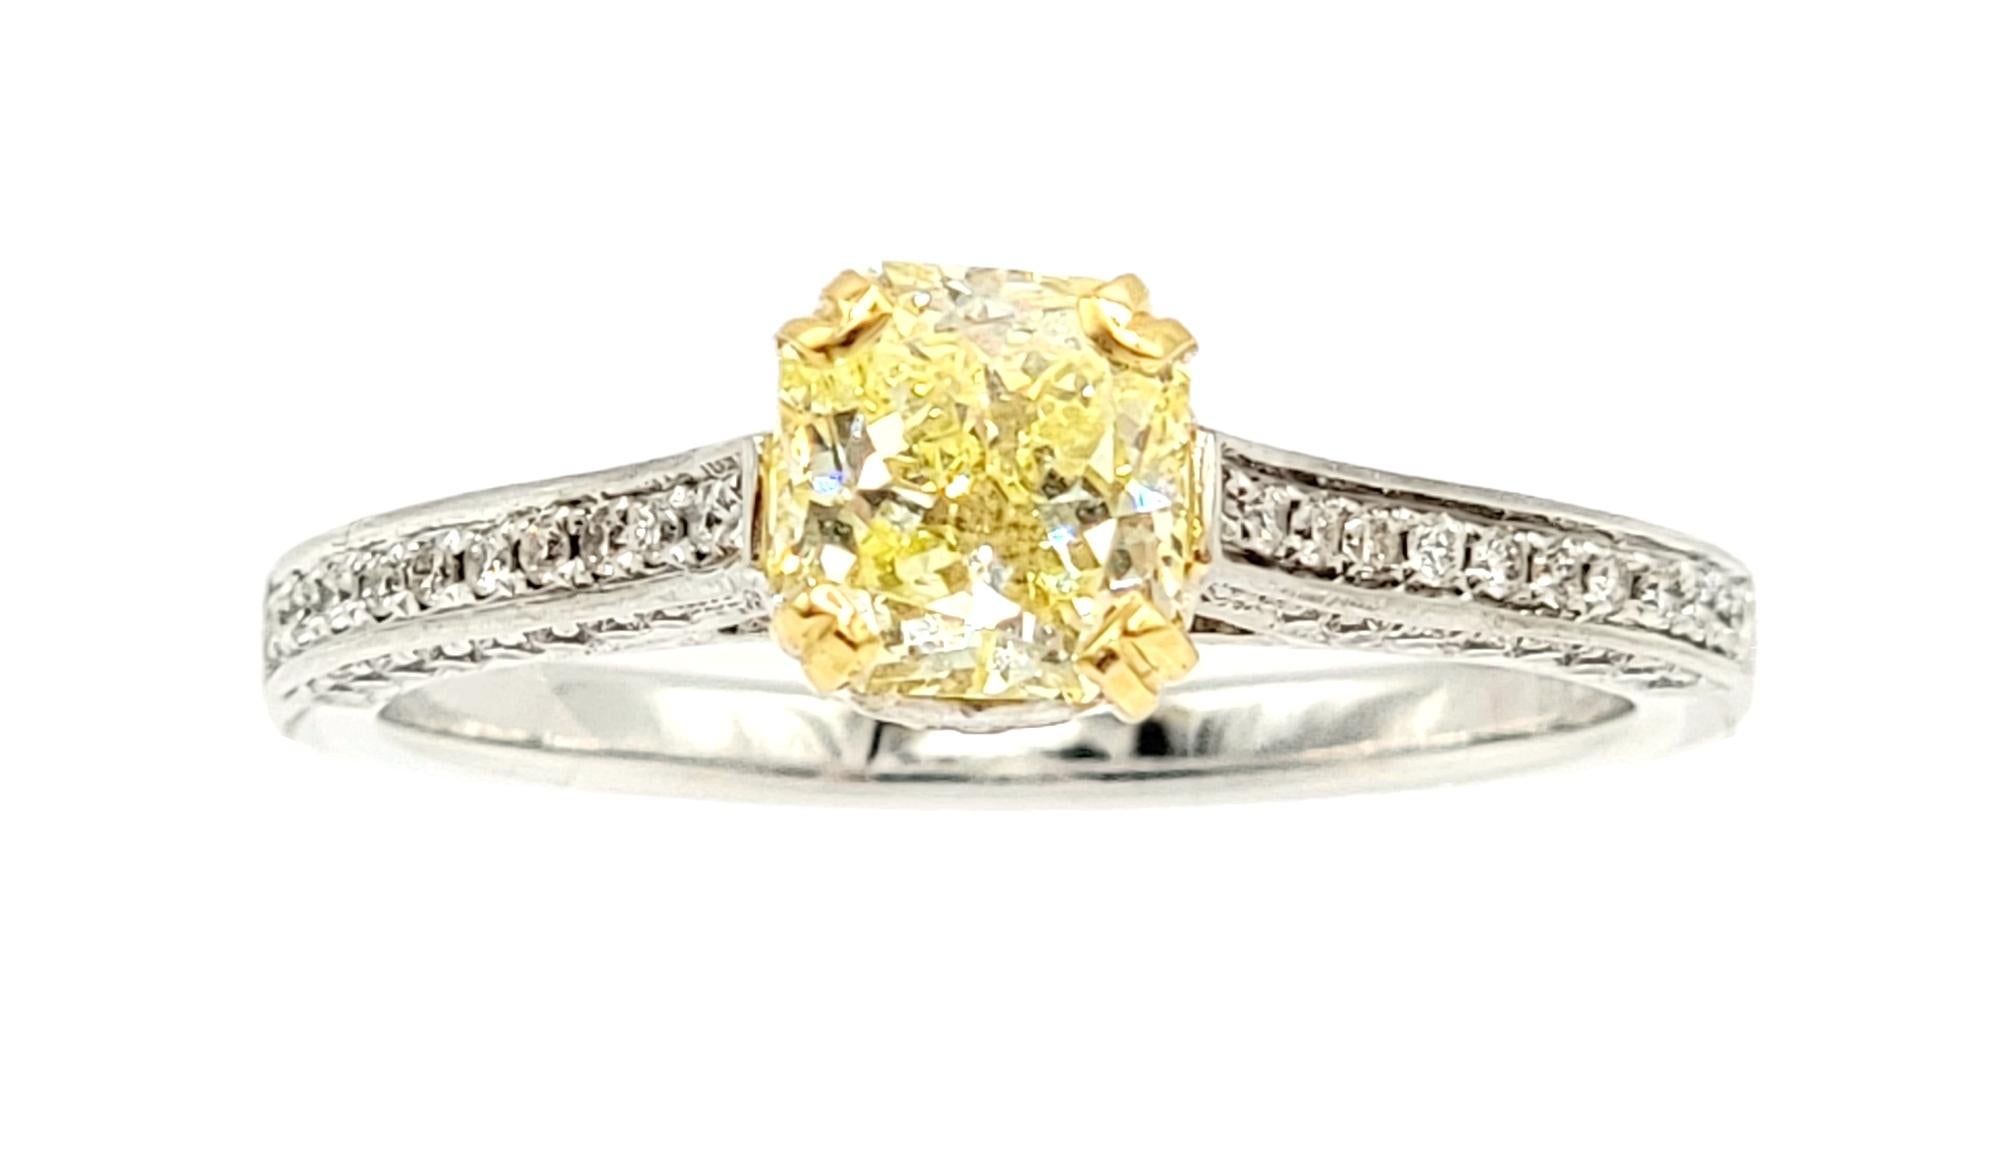 Ring size: 6.5

Gorgeous and unique yellow and white diamond engagement ring design that showcases the color and brilliance of both. The breathtaking ring features a sparkling radiant cut .85 carat Fancy Intense Yellow diamond 4 prong set at the